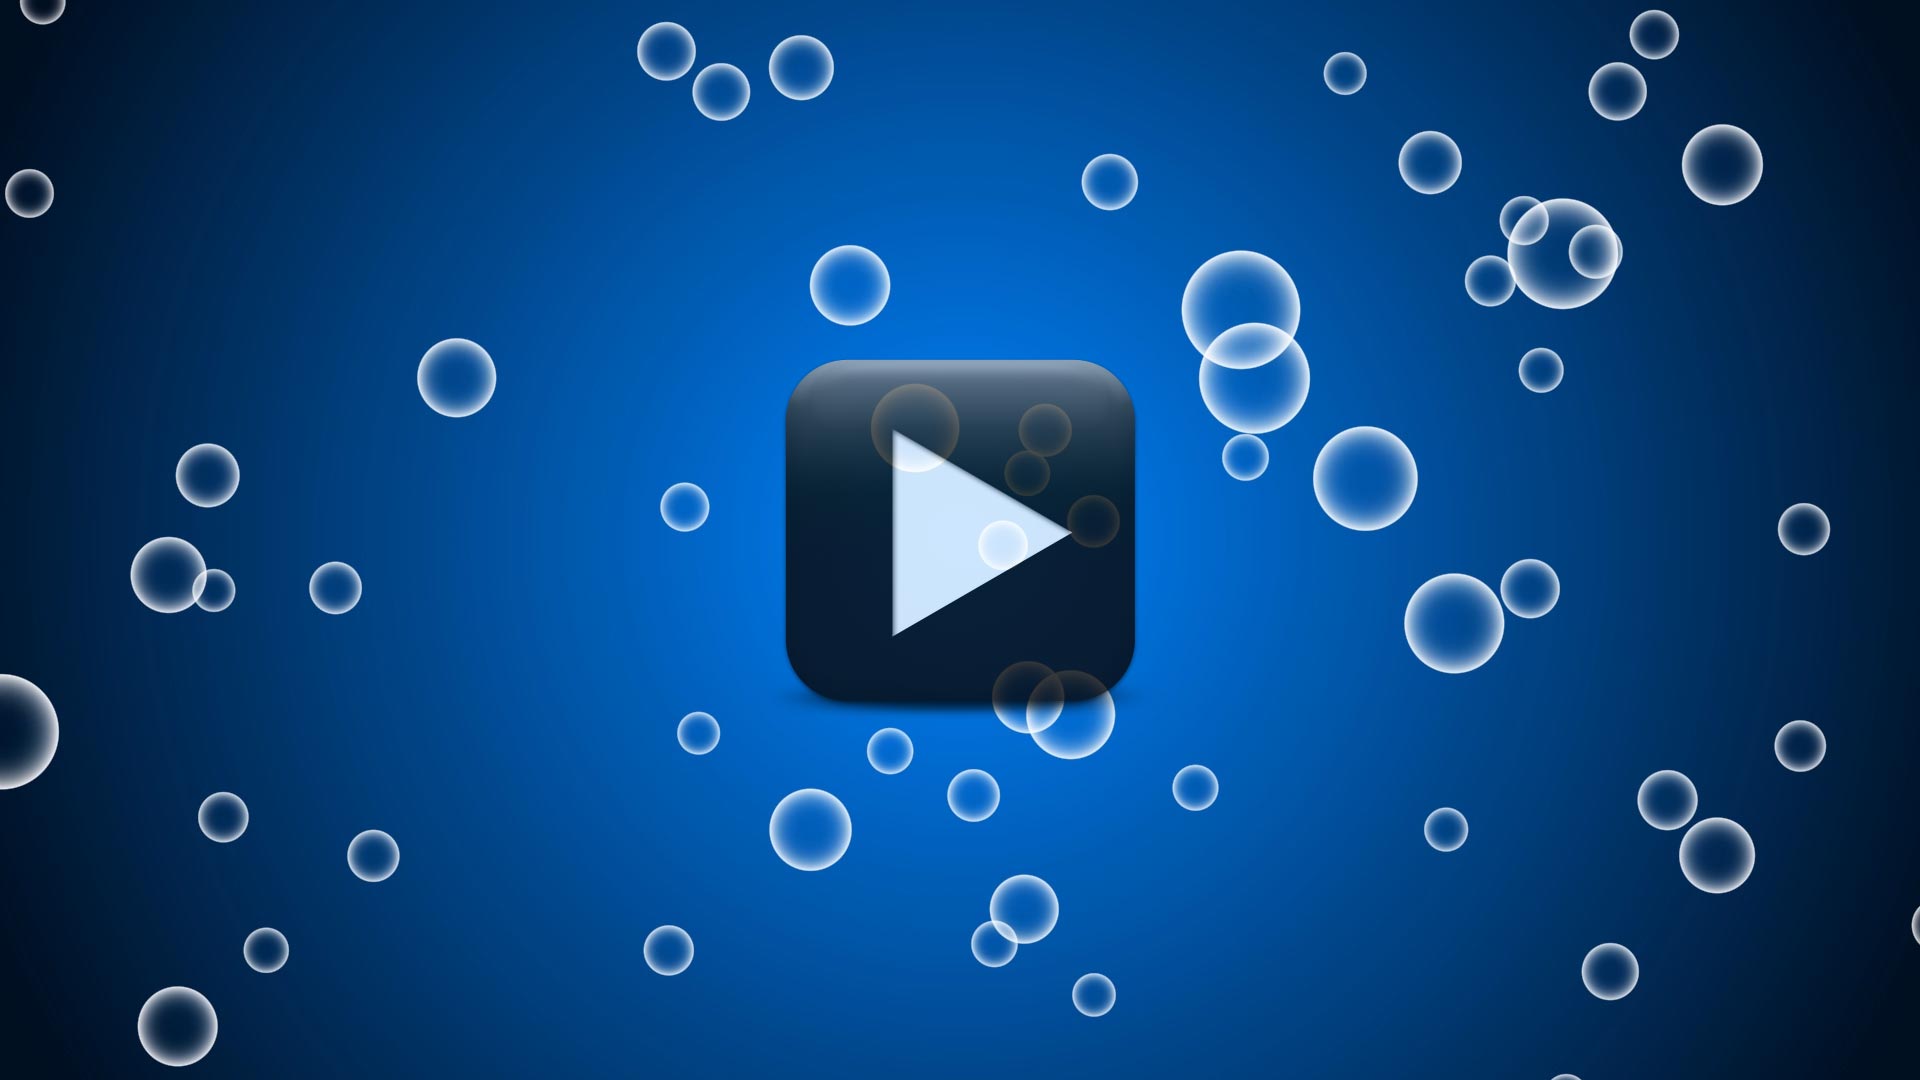 Bubbles Animation Video Background-Free Download | All Design Creative